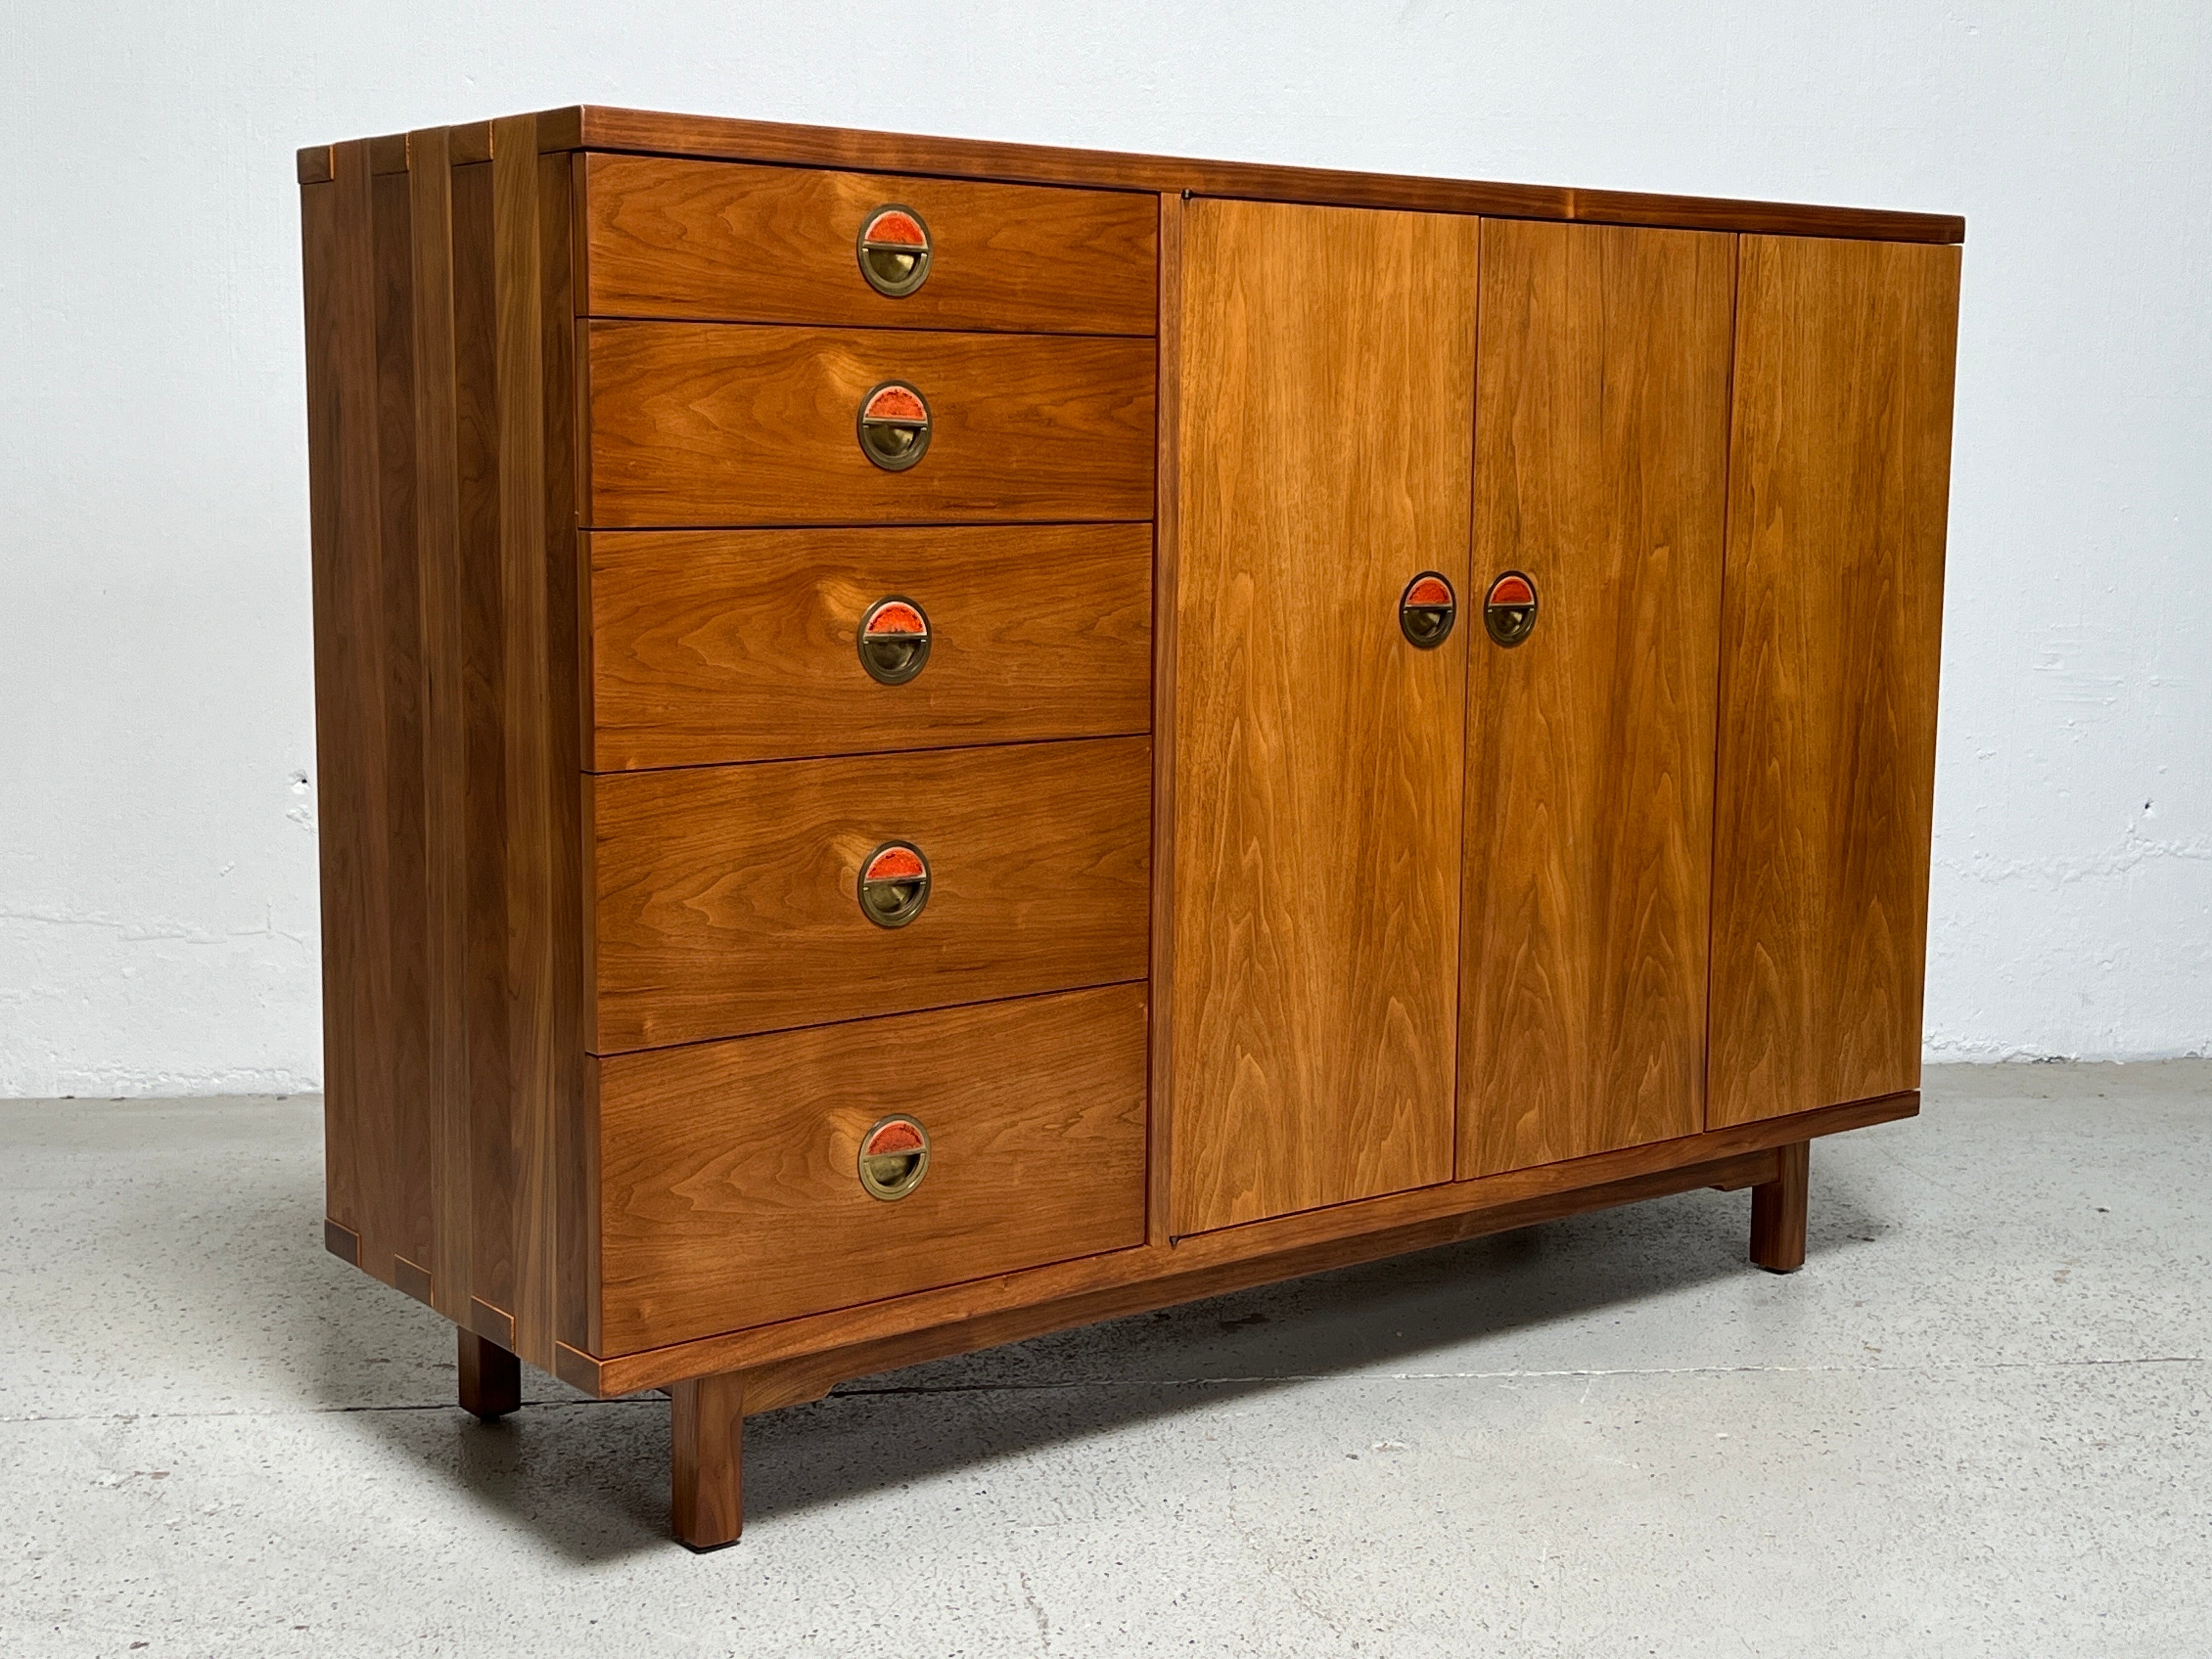 A rare chest designed by Edward Wormley for Dunbar. Solid walnut construction with exposed joinery and brass pulls with ceramic tiles by greta and Otto Natzler.  Matching dresser available separately. 